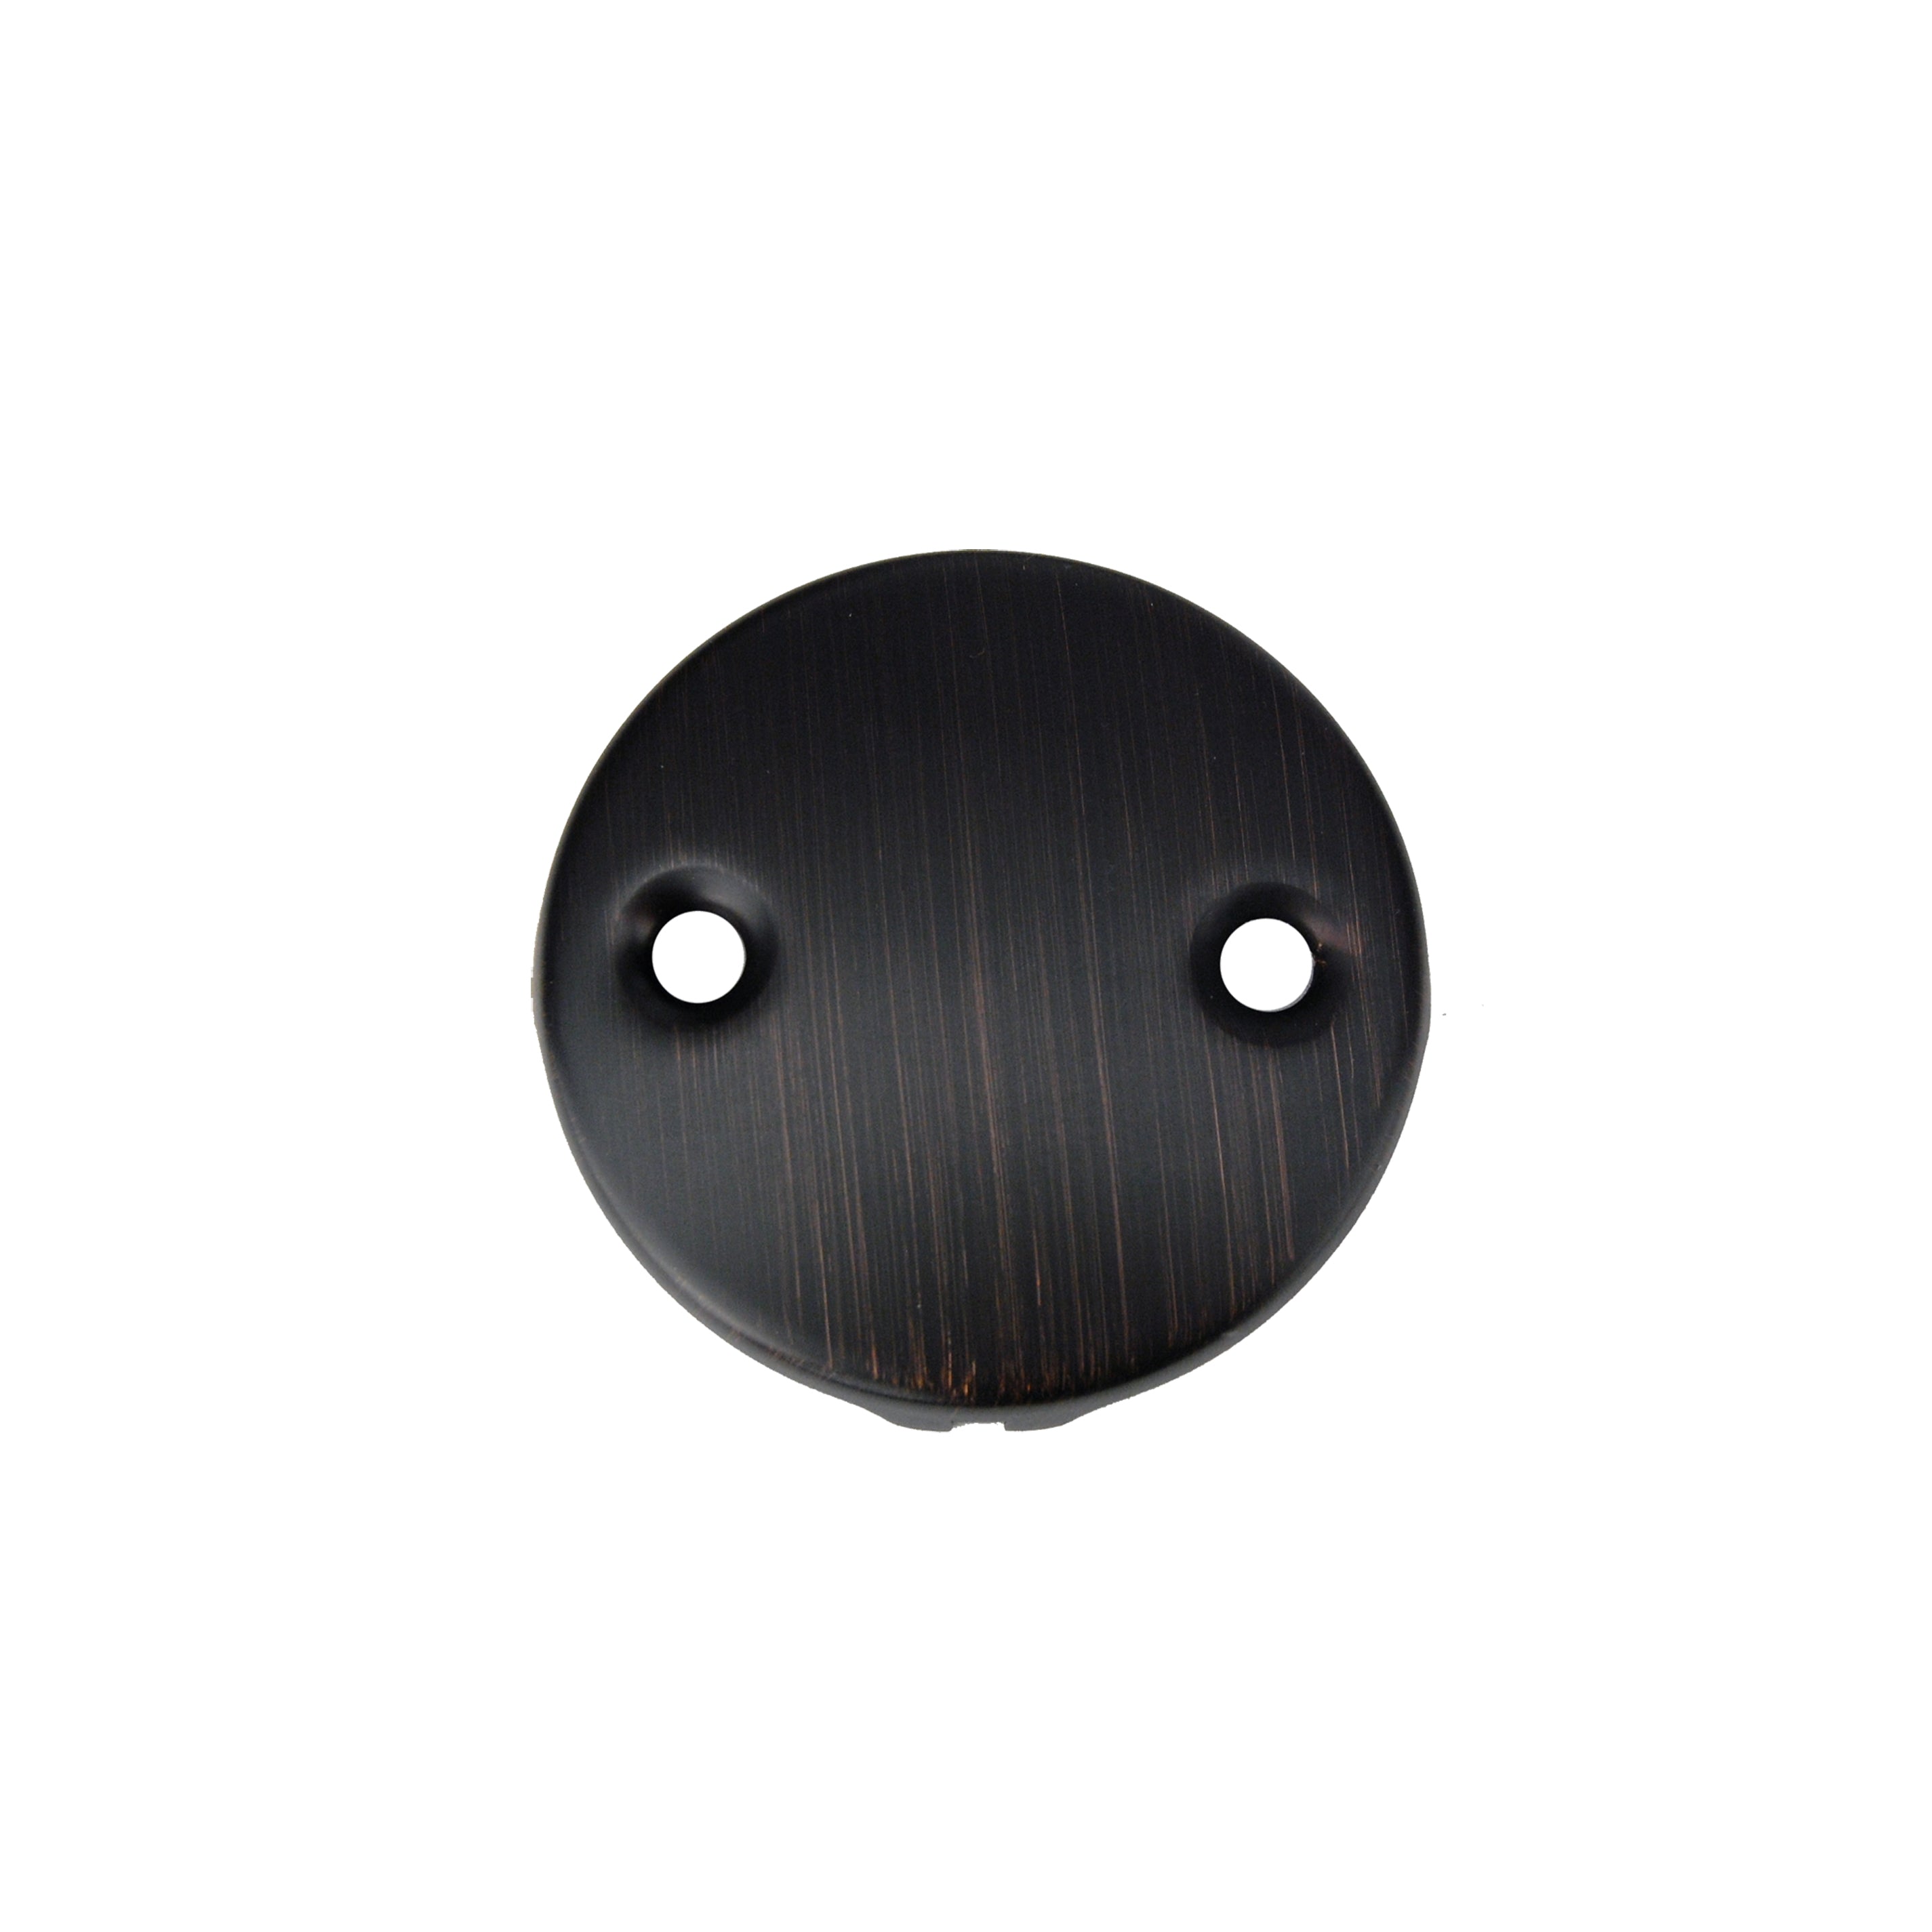 Premier Copper Products D-302ORB Tub Drain Trim and Two-Hole Overflow Cover for Bath Tubs - Oil Rubbed Bronze